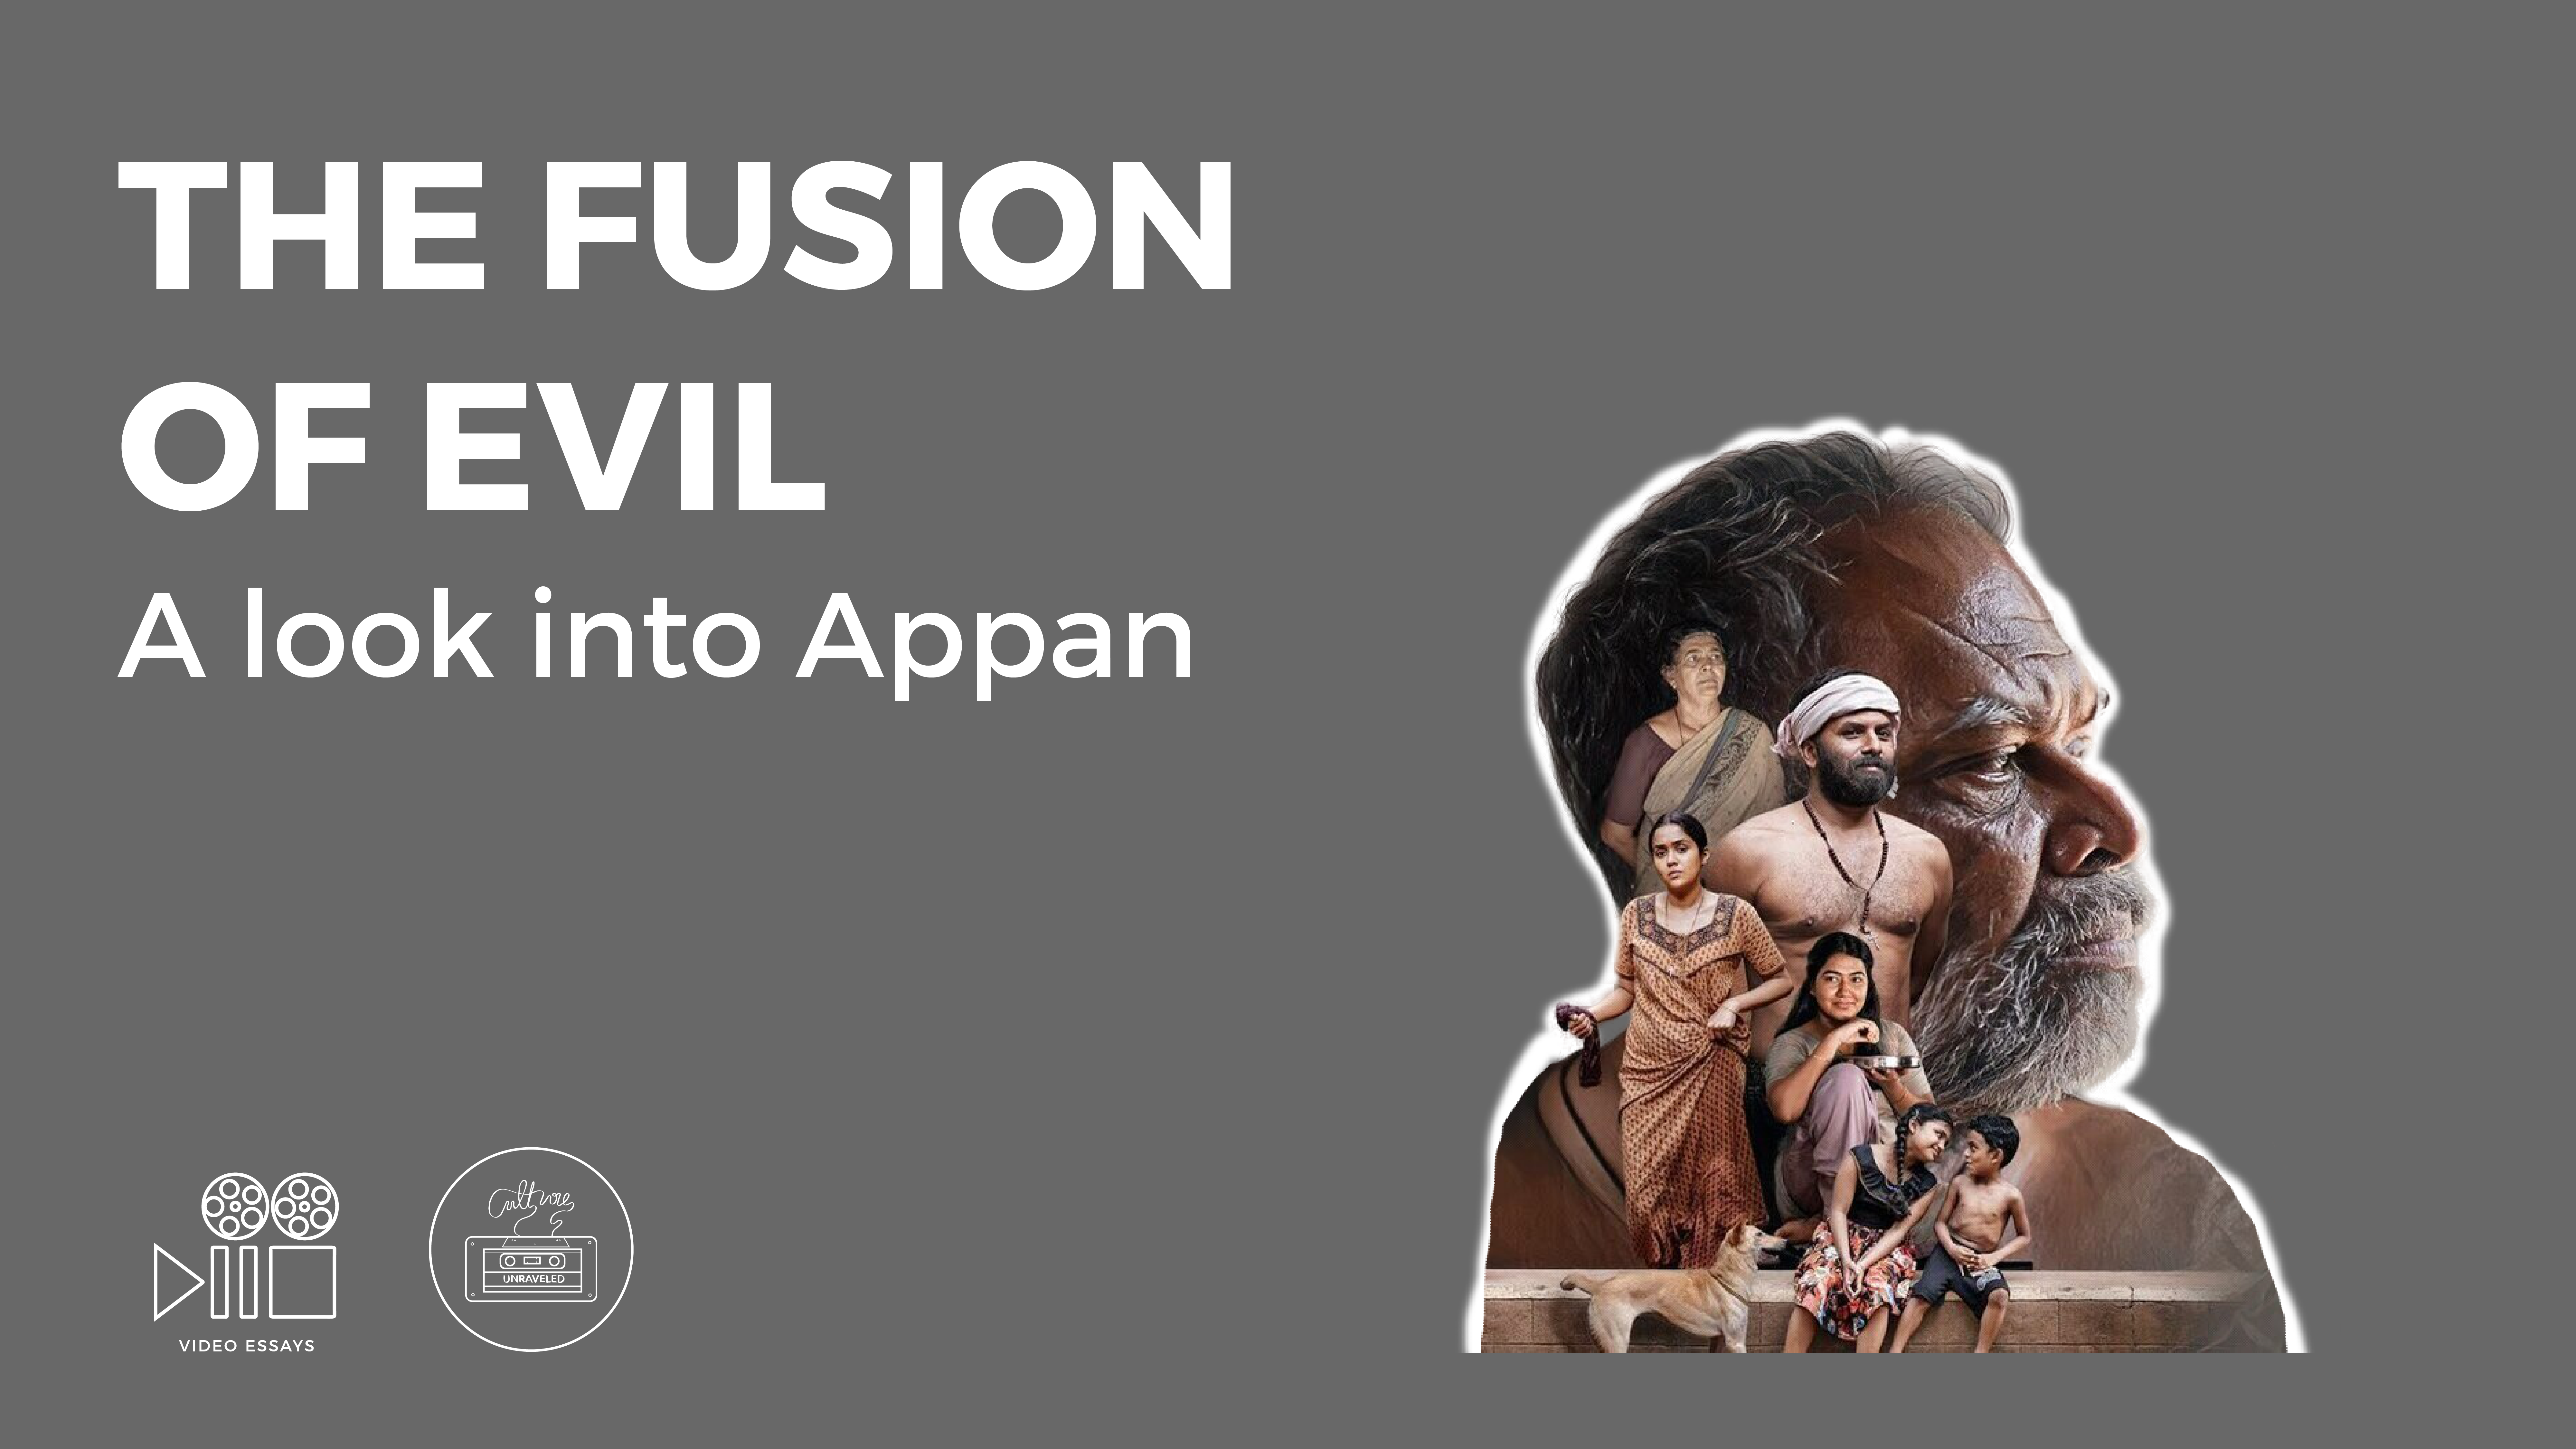 The Fusion of Evil. A Look into Appan